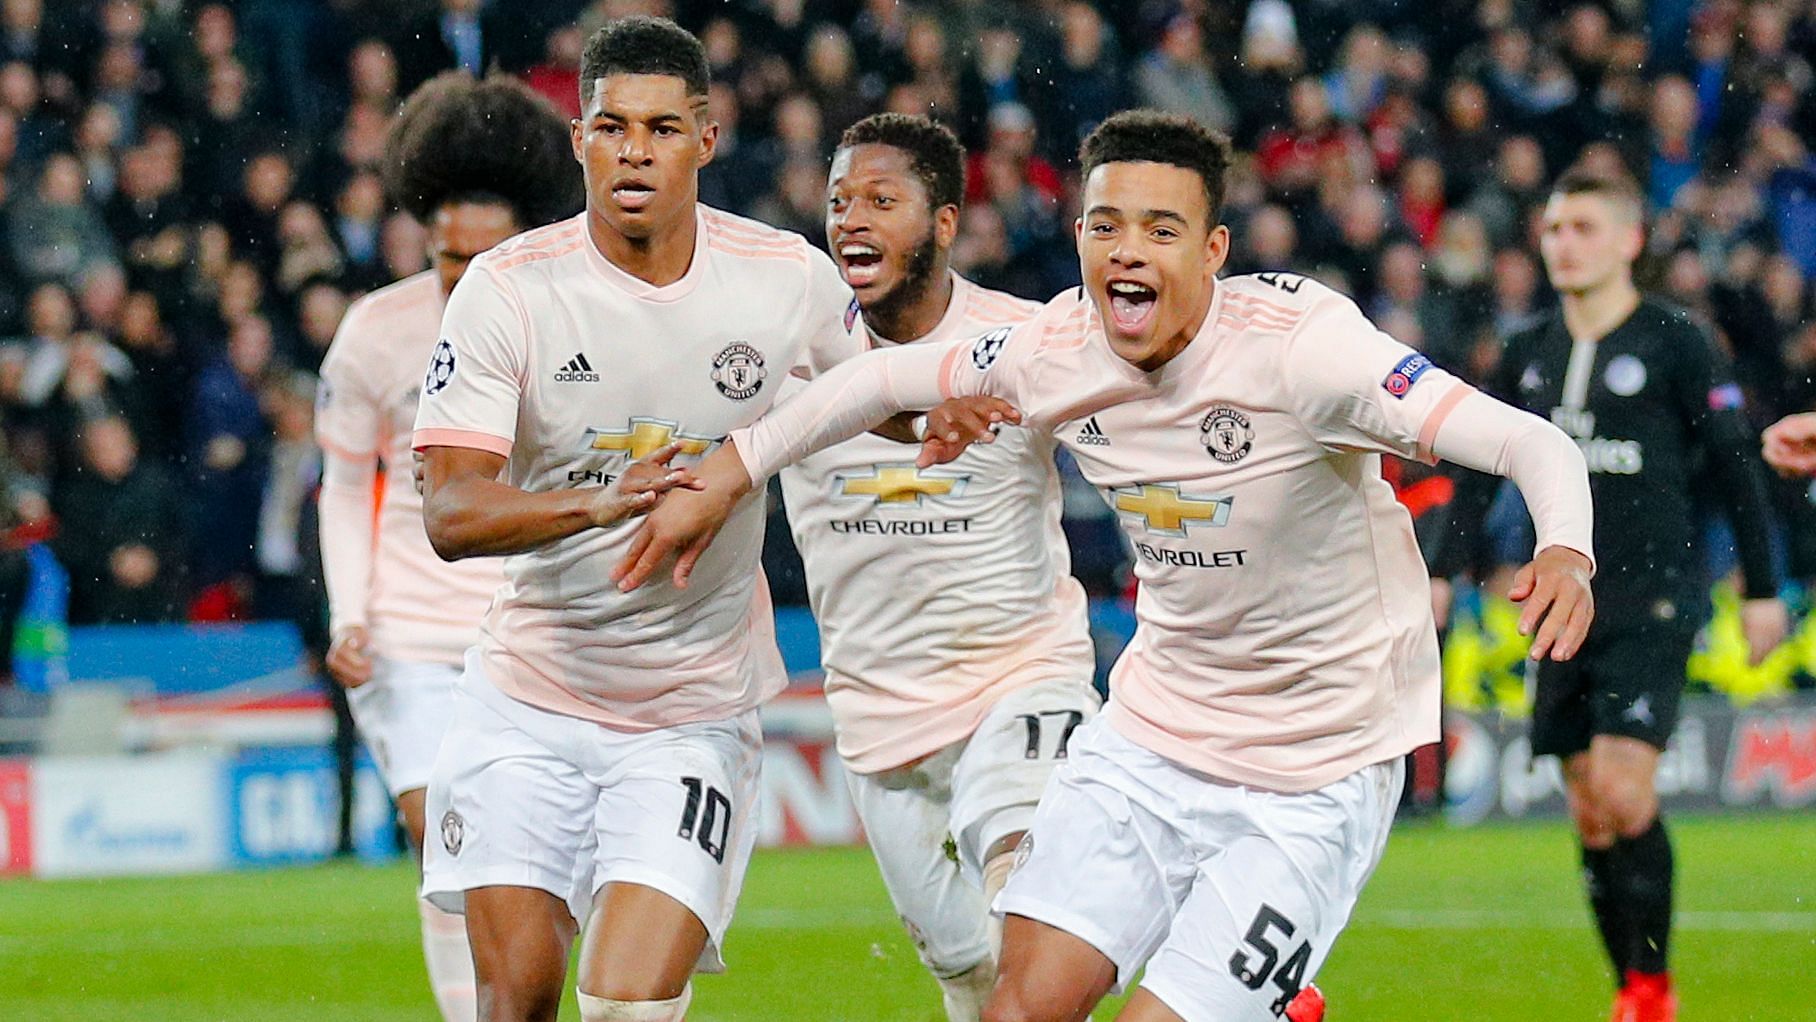 Manchester United’s Marcus Rashford (left) celebrates after scoring his side’s third goal during the Champions League round of 16, second leg  match against  Paris Saint Germain in Paris on Wednesday, March. 6.